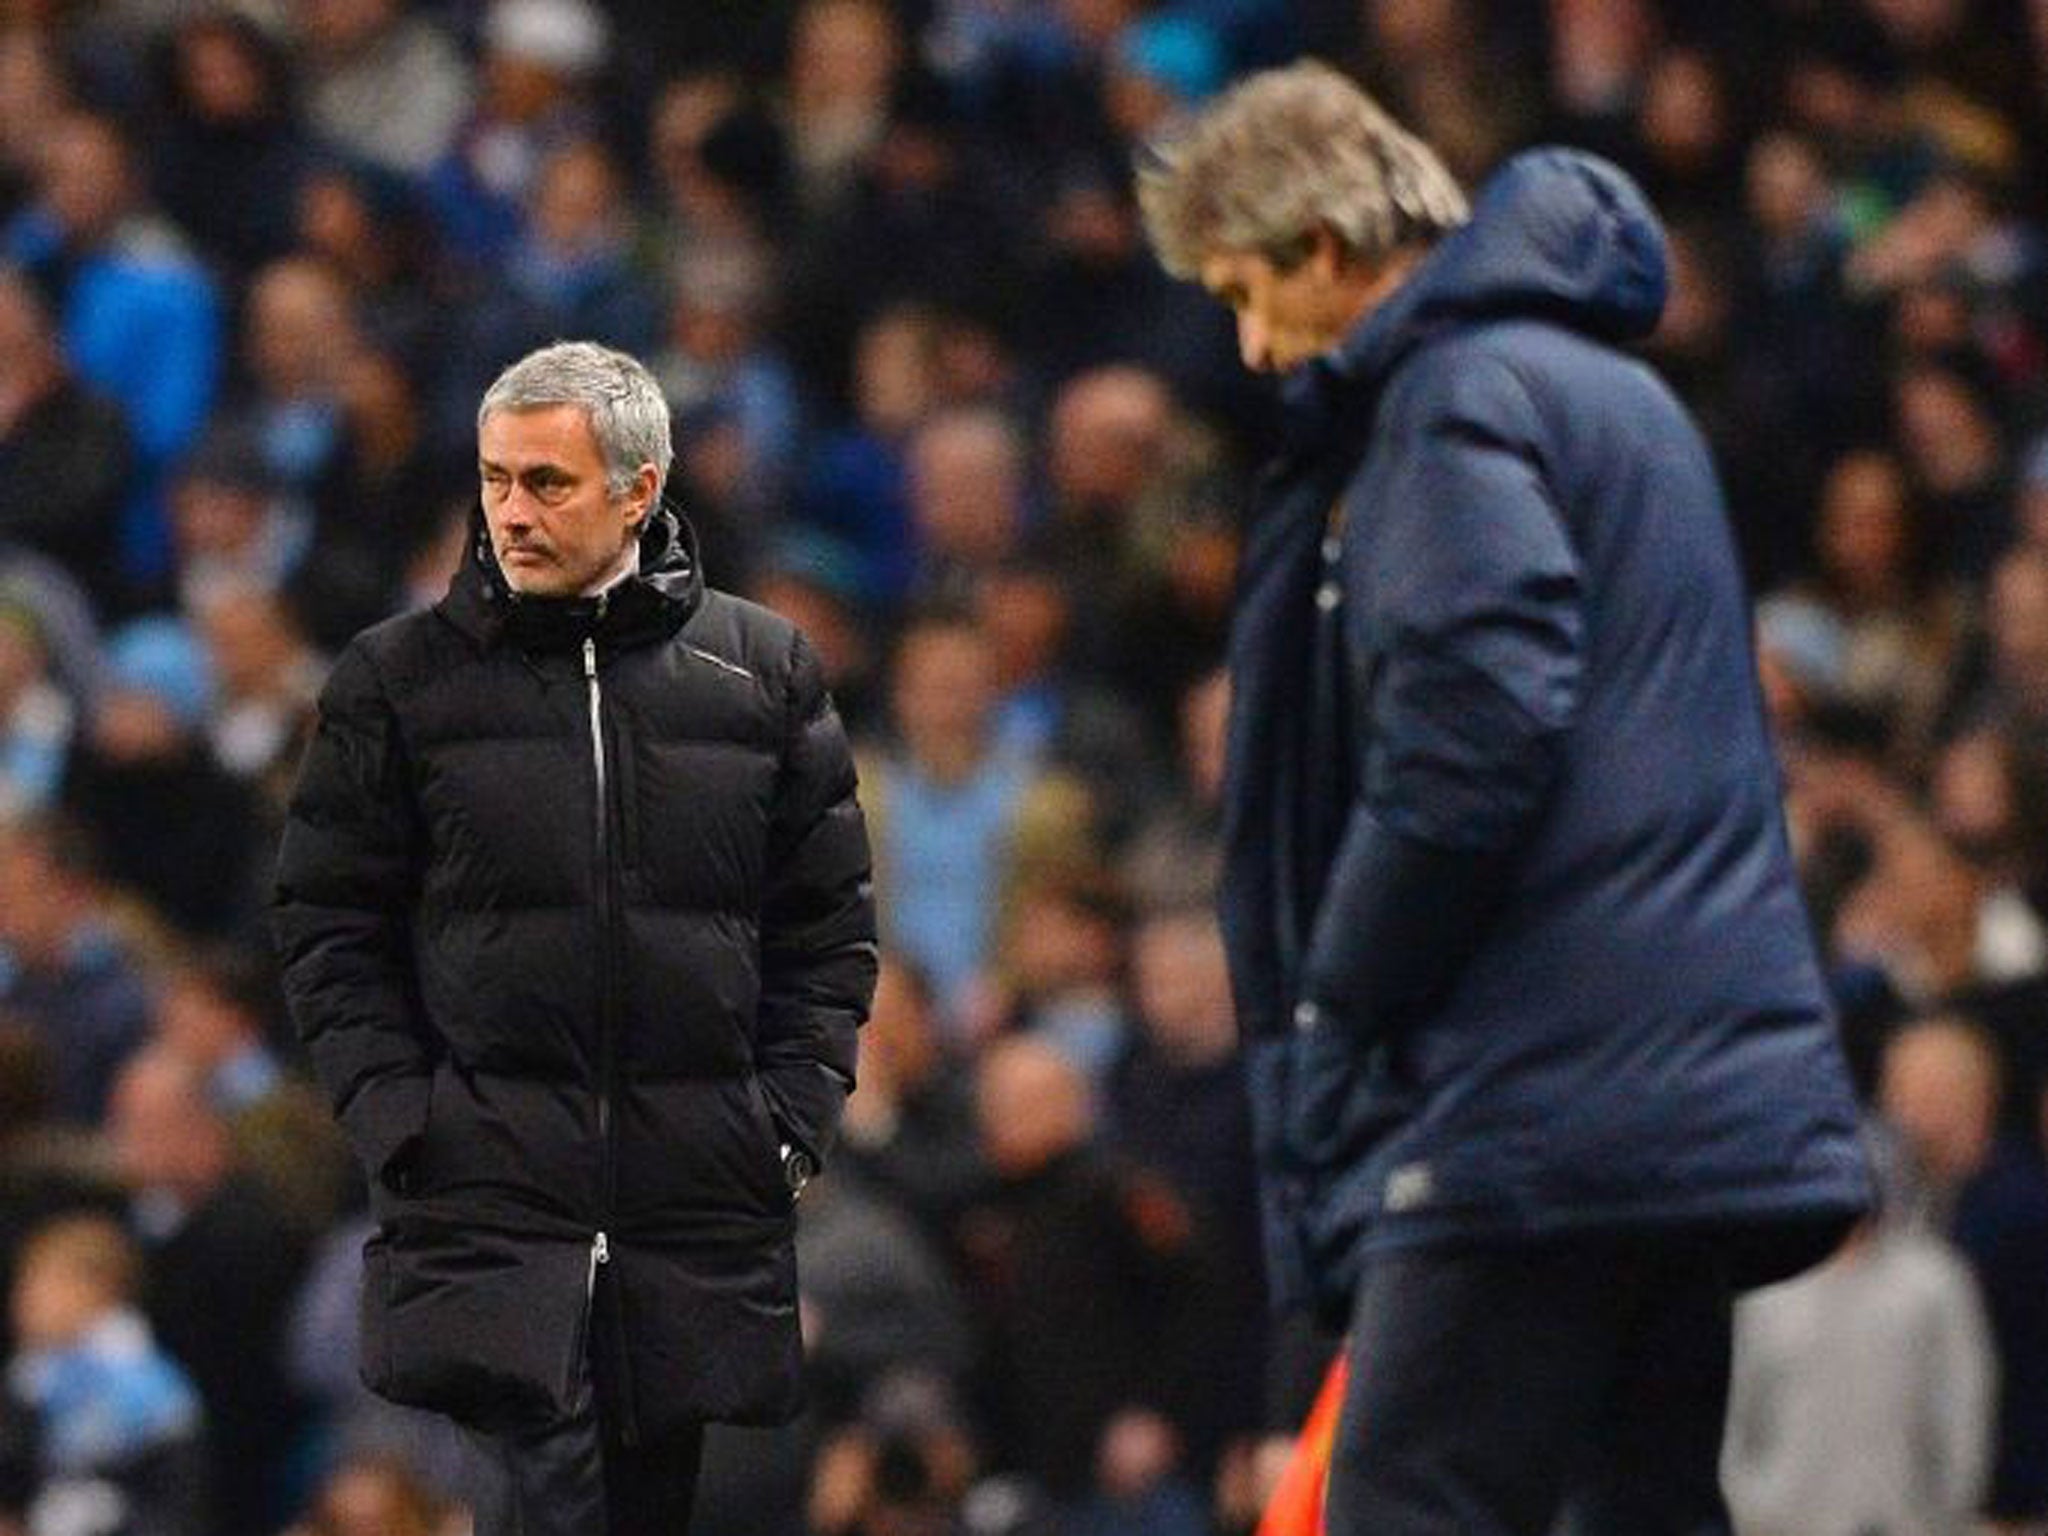 Jose Mourinho (left) and Manuel Pellegrini on the touchline at the Etihad Stadium earlier this month